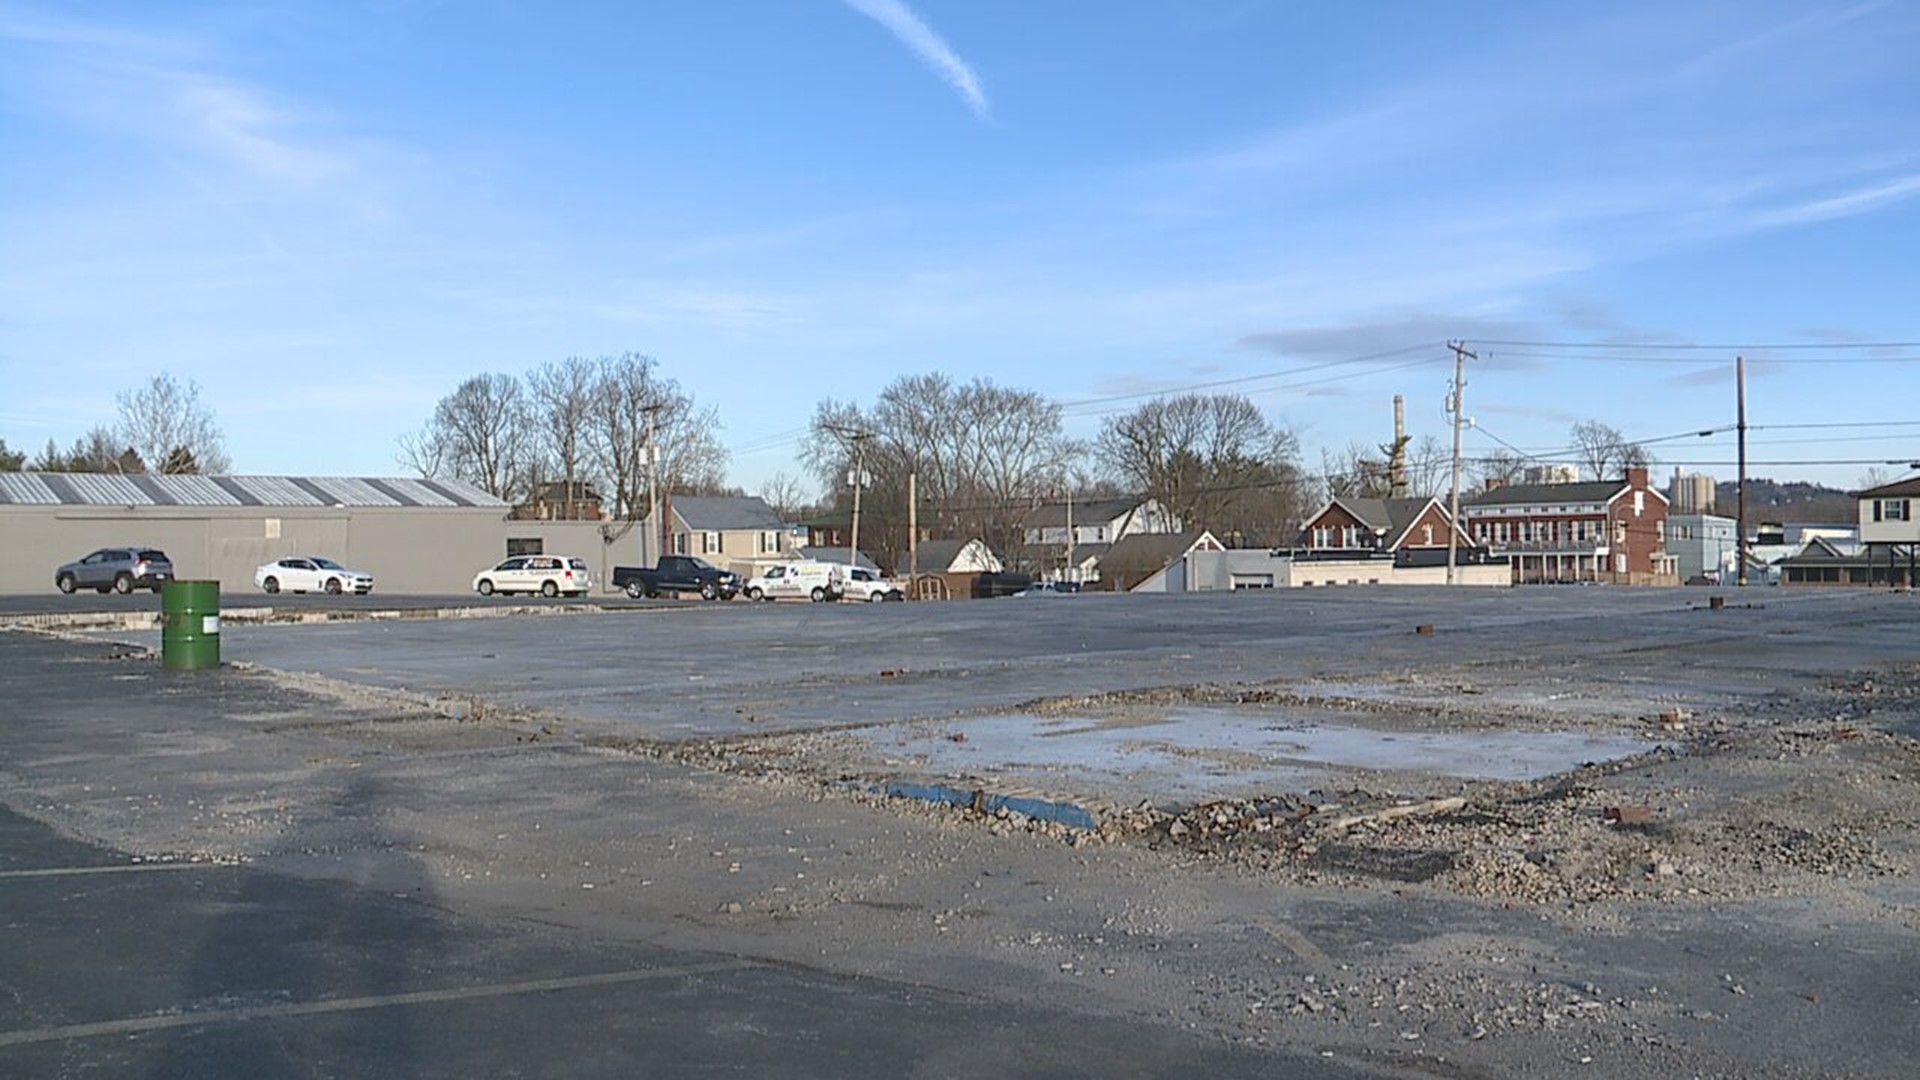 One West Manchester Township supervisor is proposing an amendment to a zoning law that will allow the owners of Mr. Q's to rebuild their business.